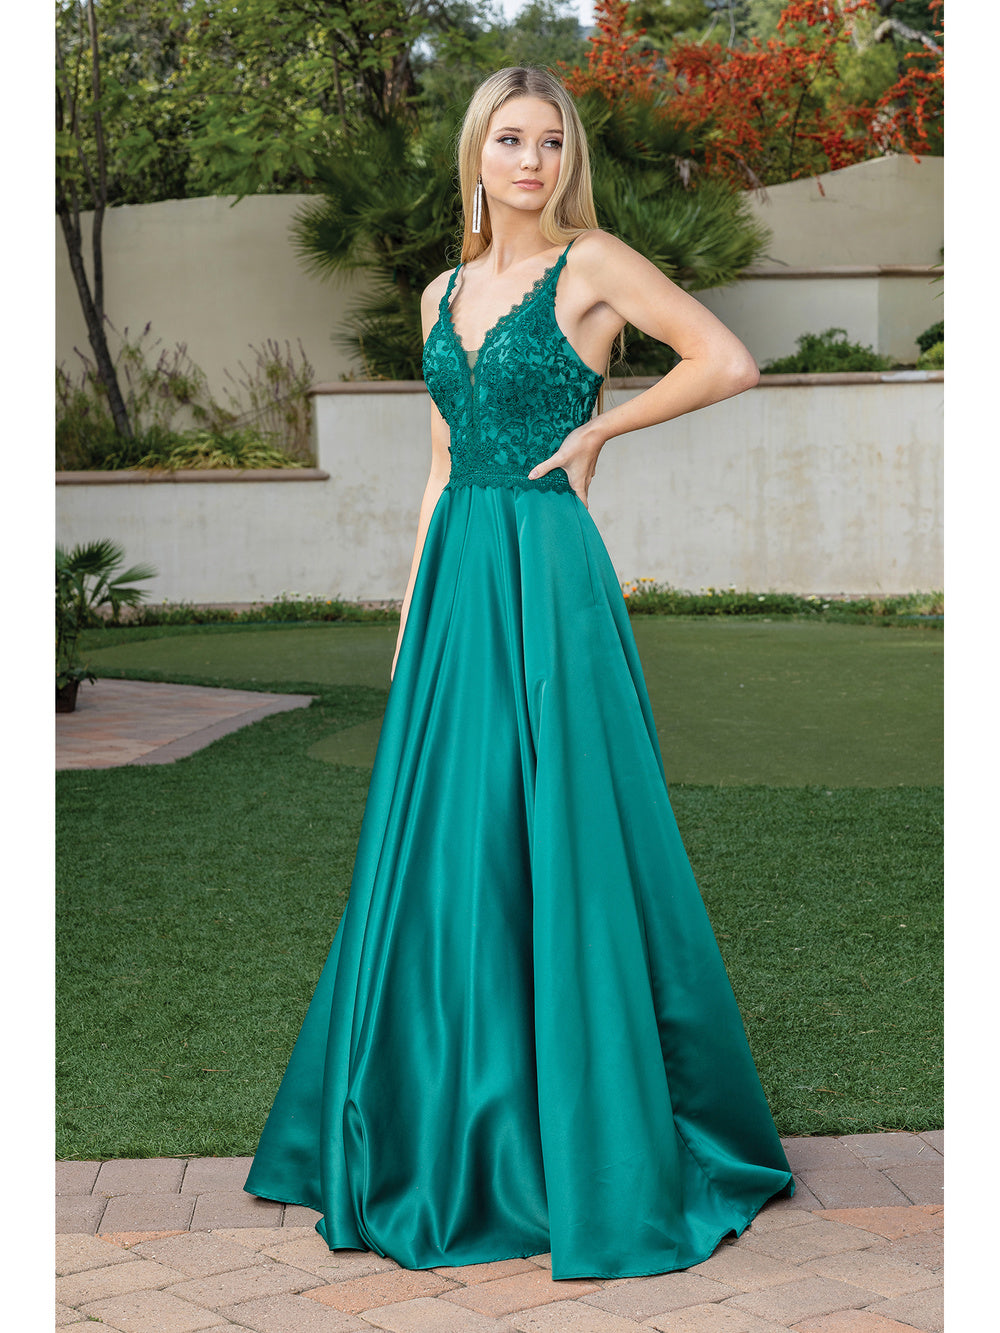 DQ 4260 - Satin A-Line Prom Gown with Lace Embellished V-Neck Bodice Open Lace Up Corset Back & Pockets Dresses Dancing Queen M HUNTER GREEN 